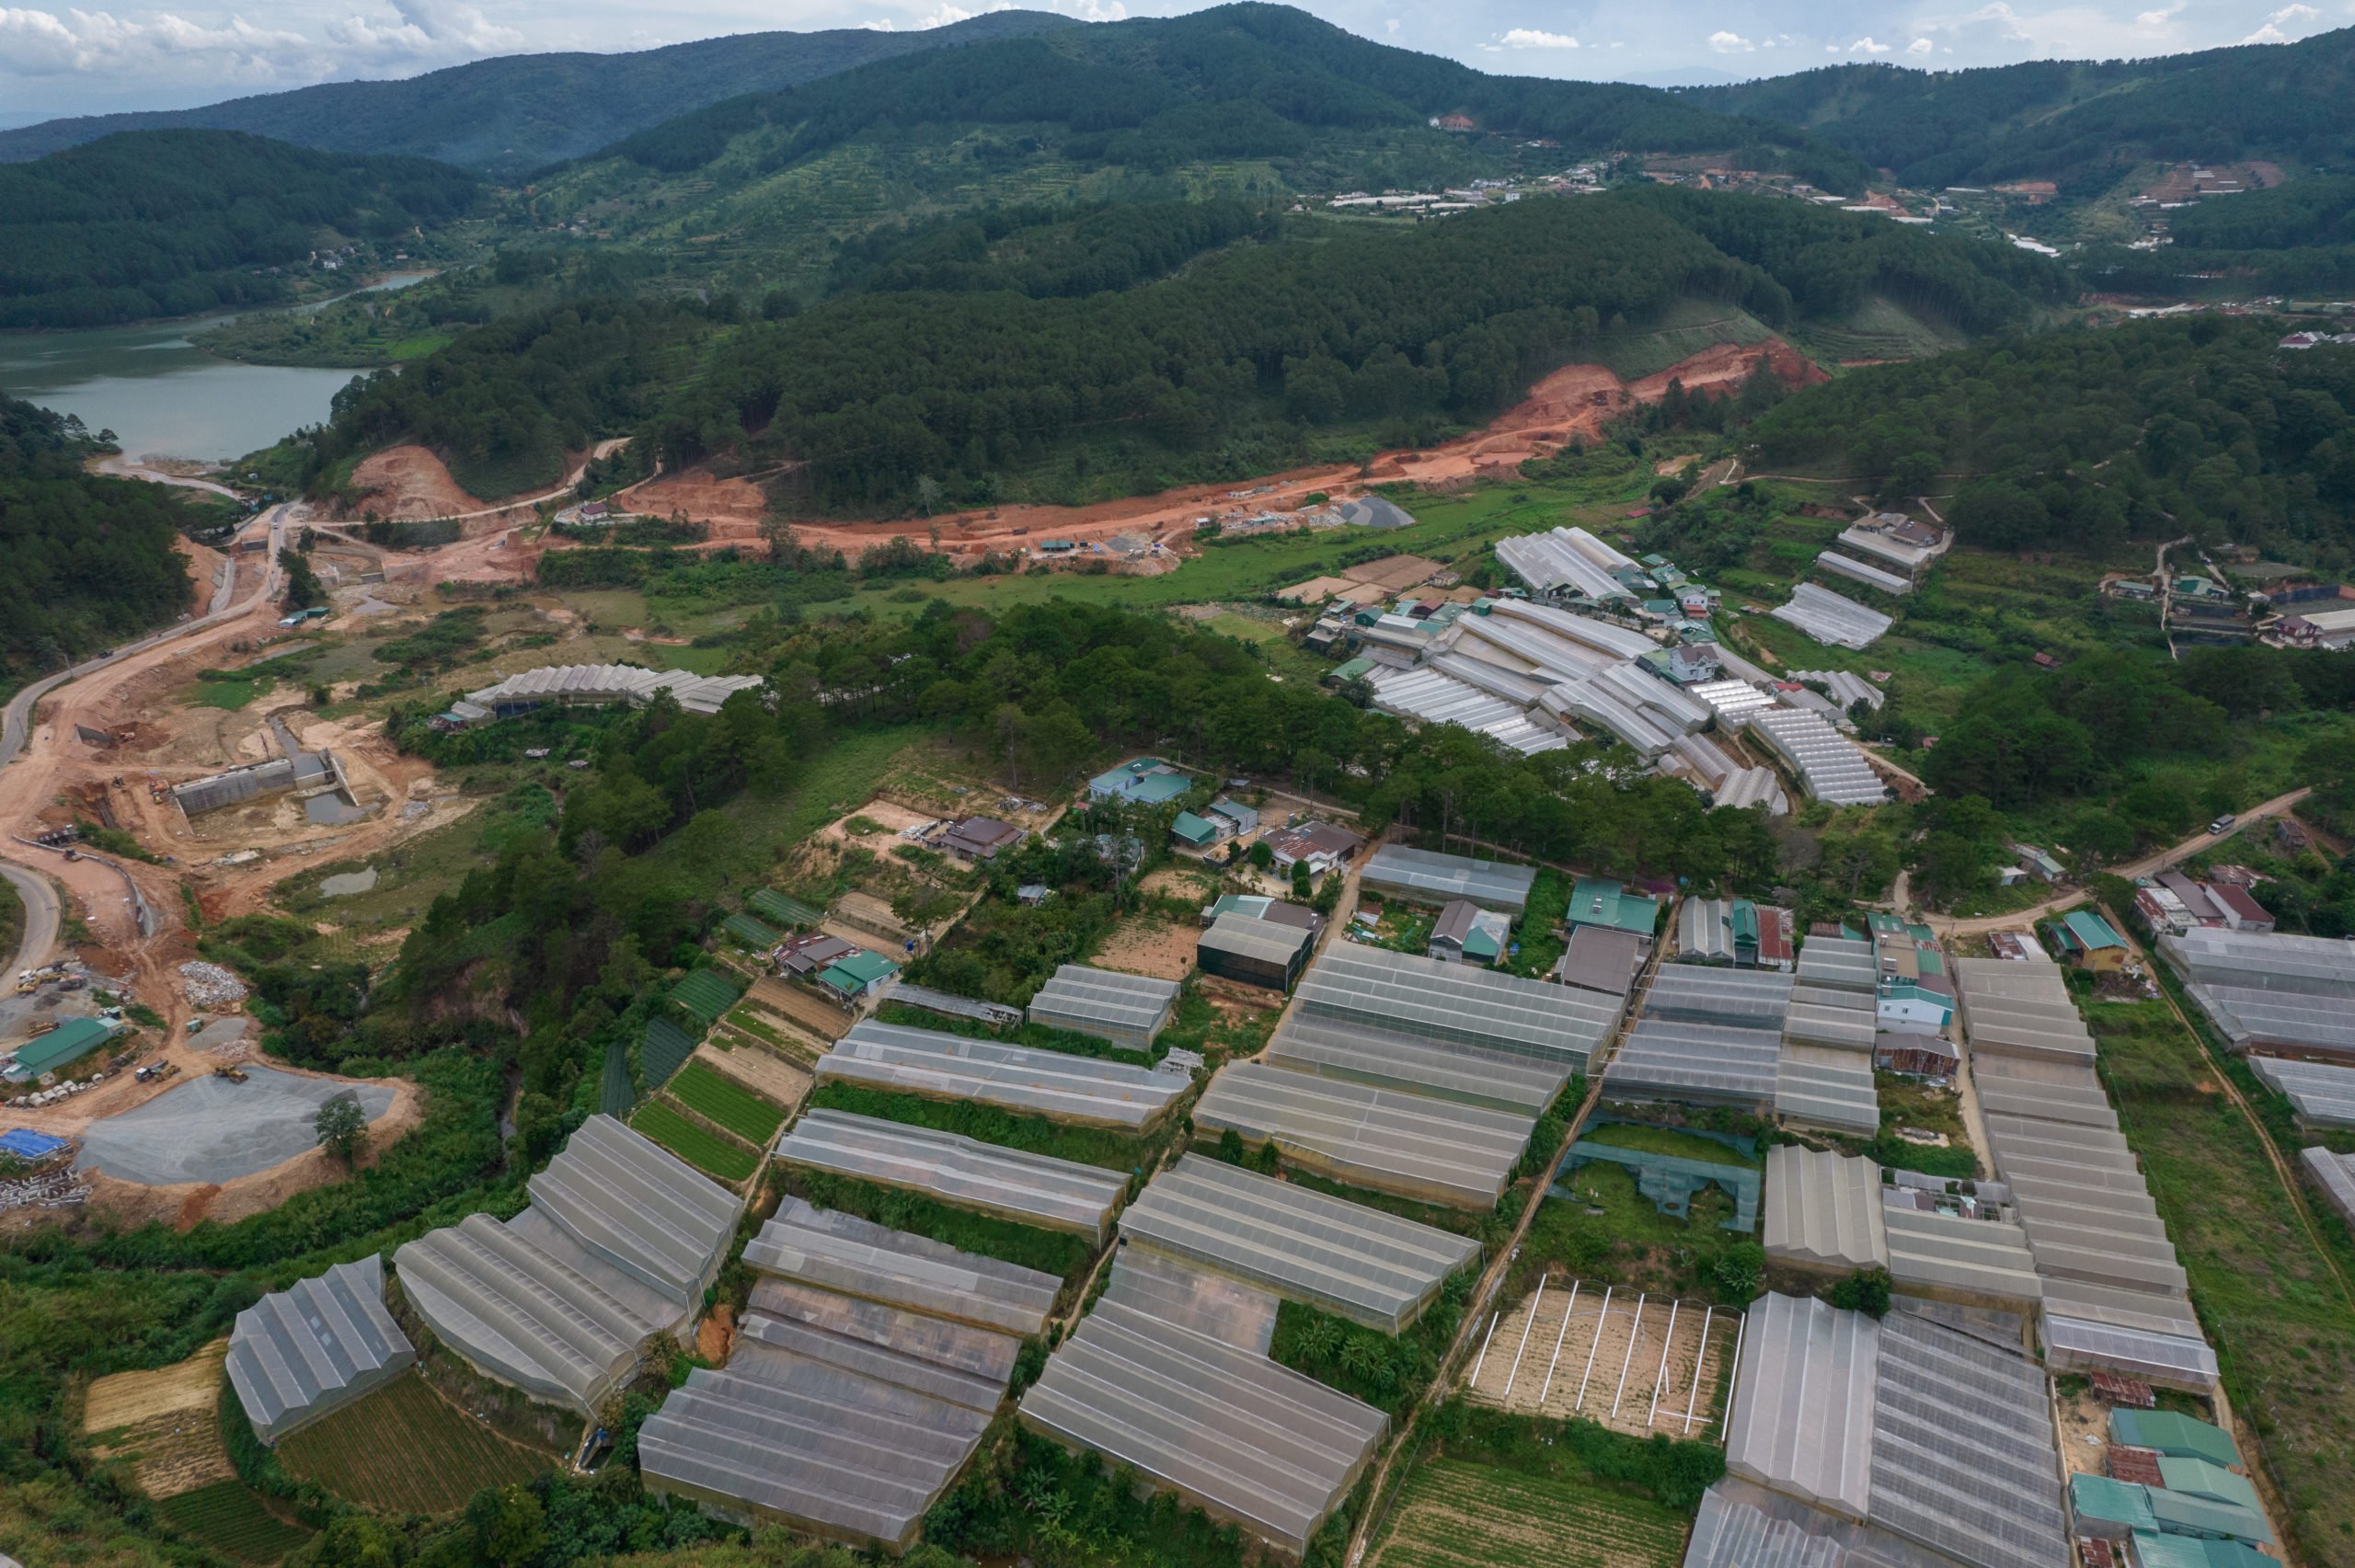 greenhouses and hills seen from above